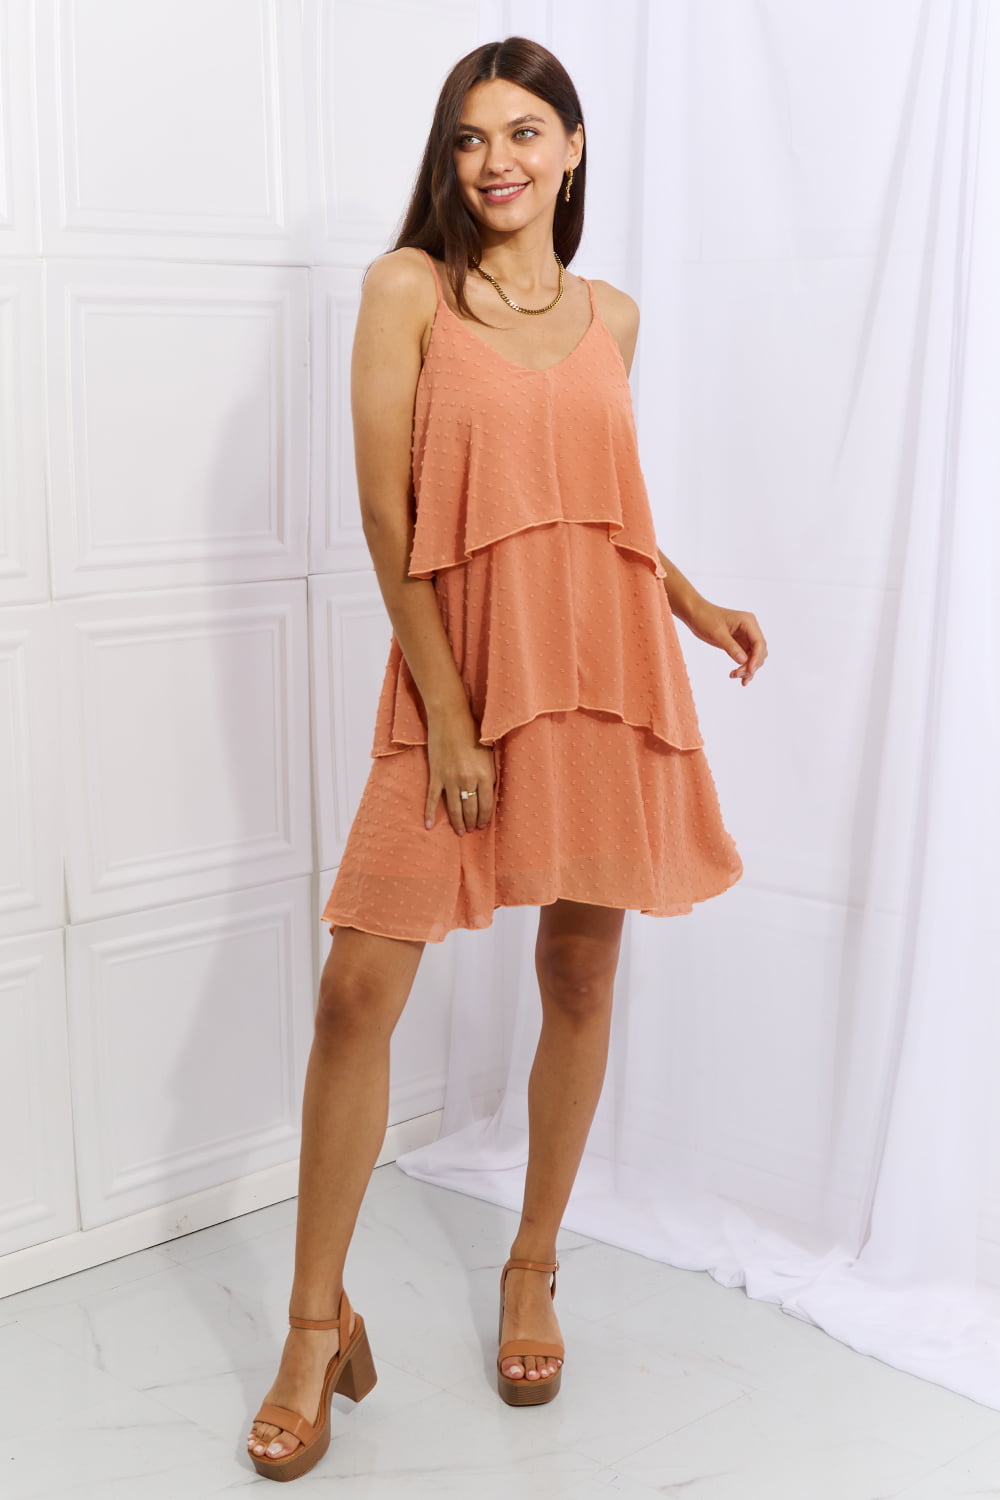 CULTURE CODE By The River Cascade Ruffle Style Cami Dress in Sherbet